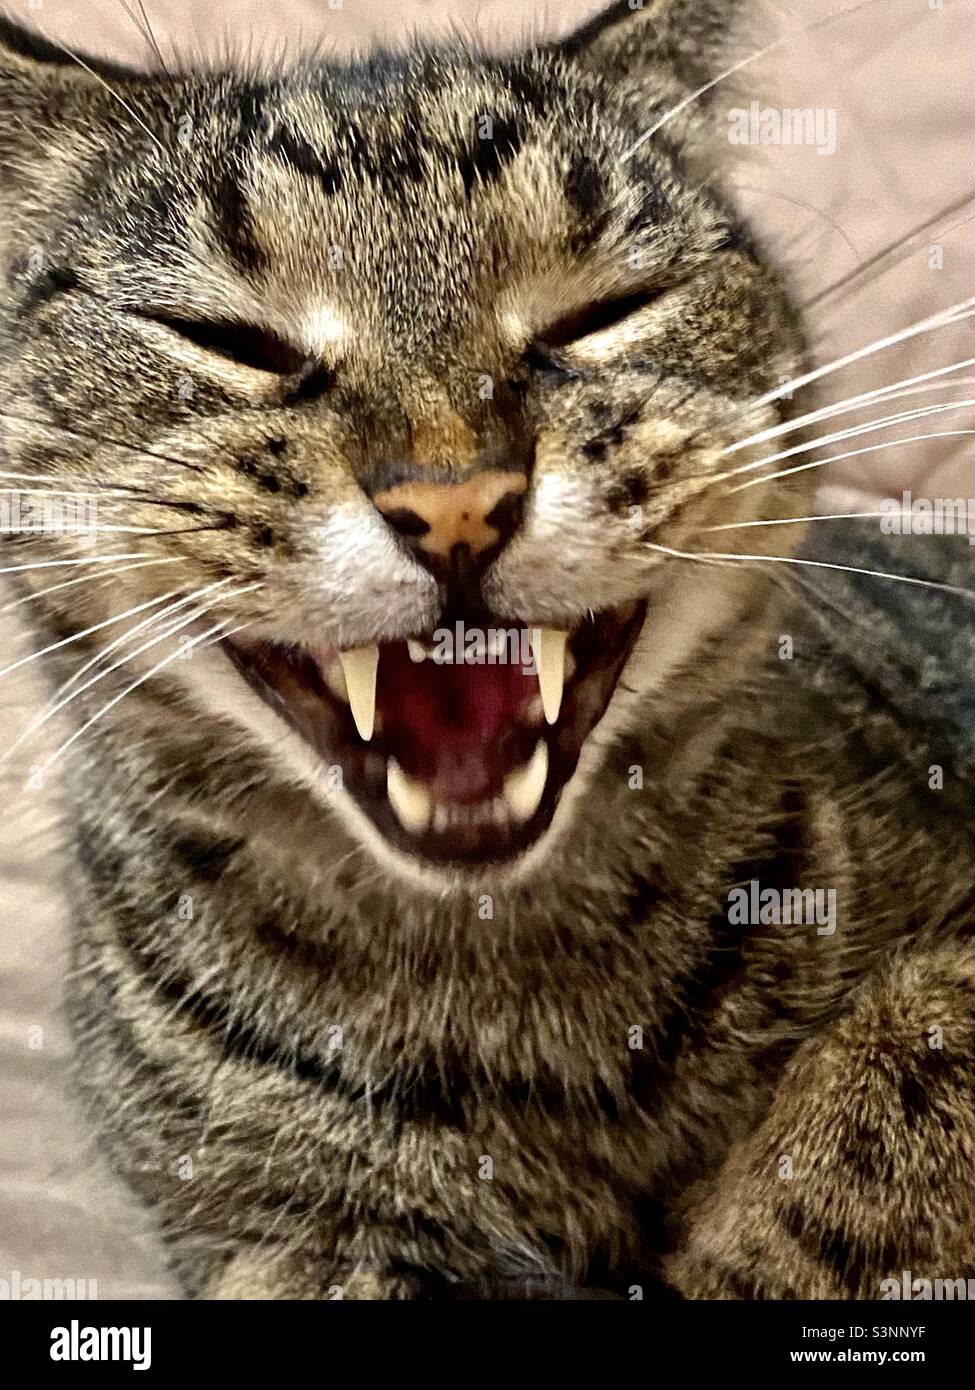 Smiling cat face; closeup of a yawning gray tabby cat showing fangs & whiskers; looks like he’s smiling or laughing, funny pet face Stock Photo